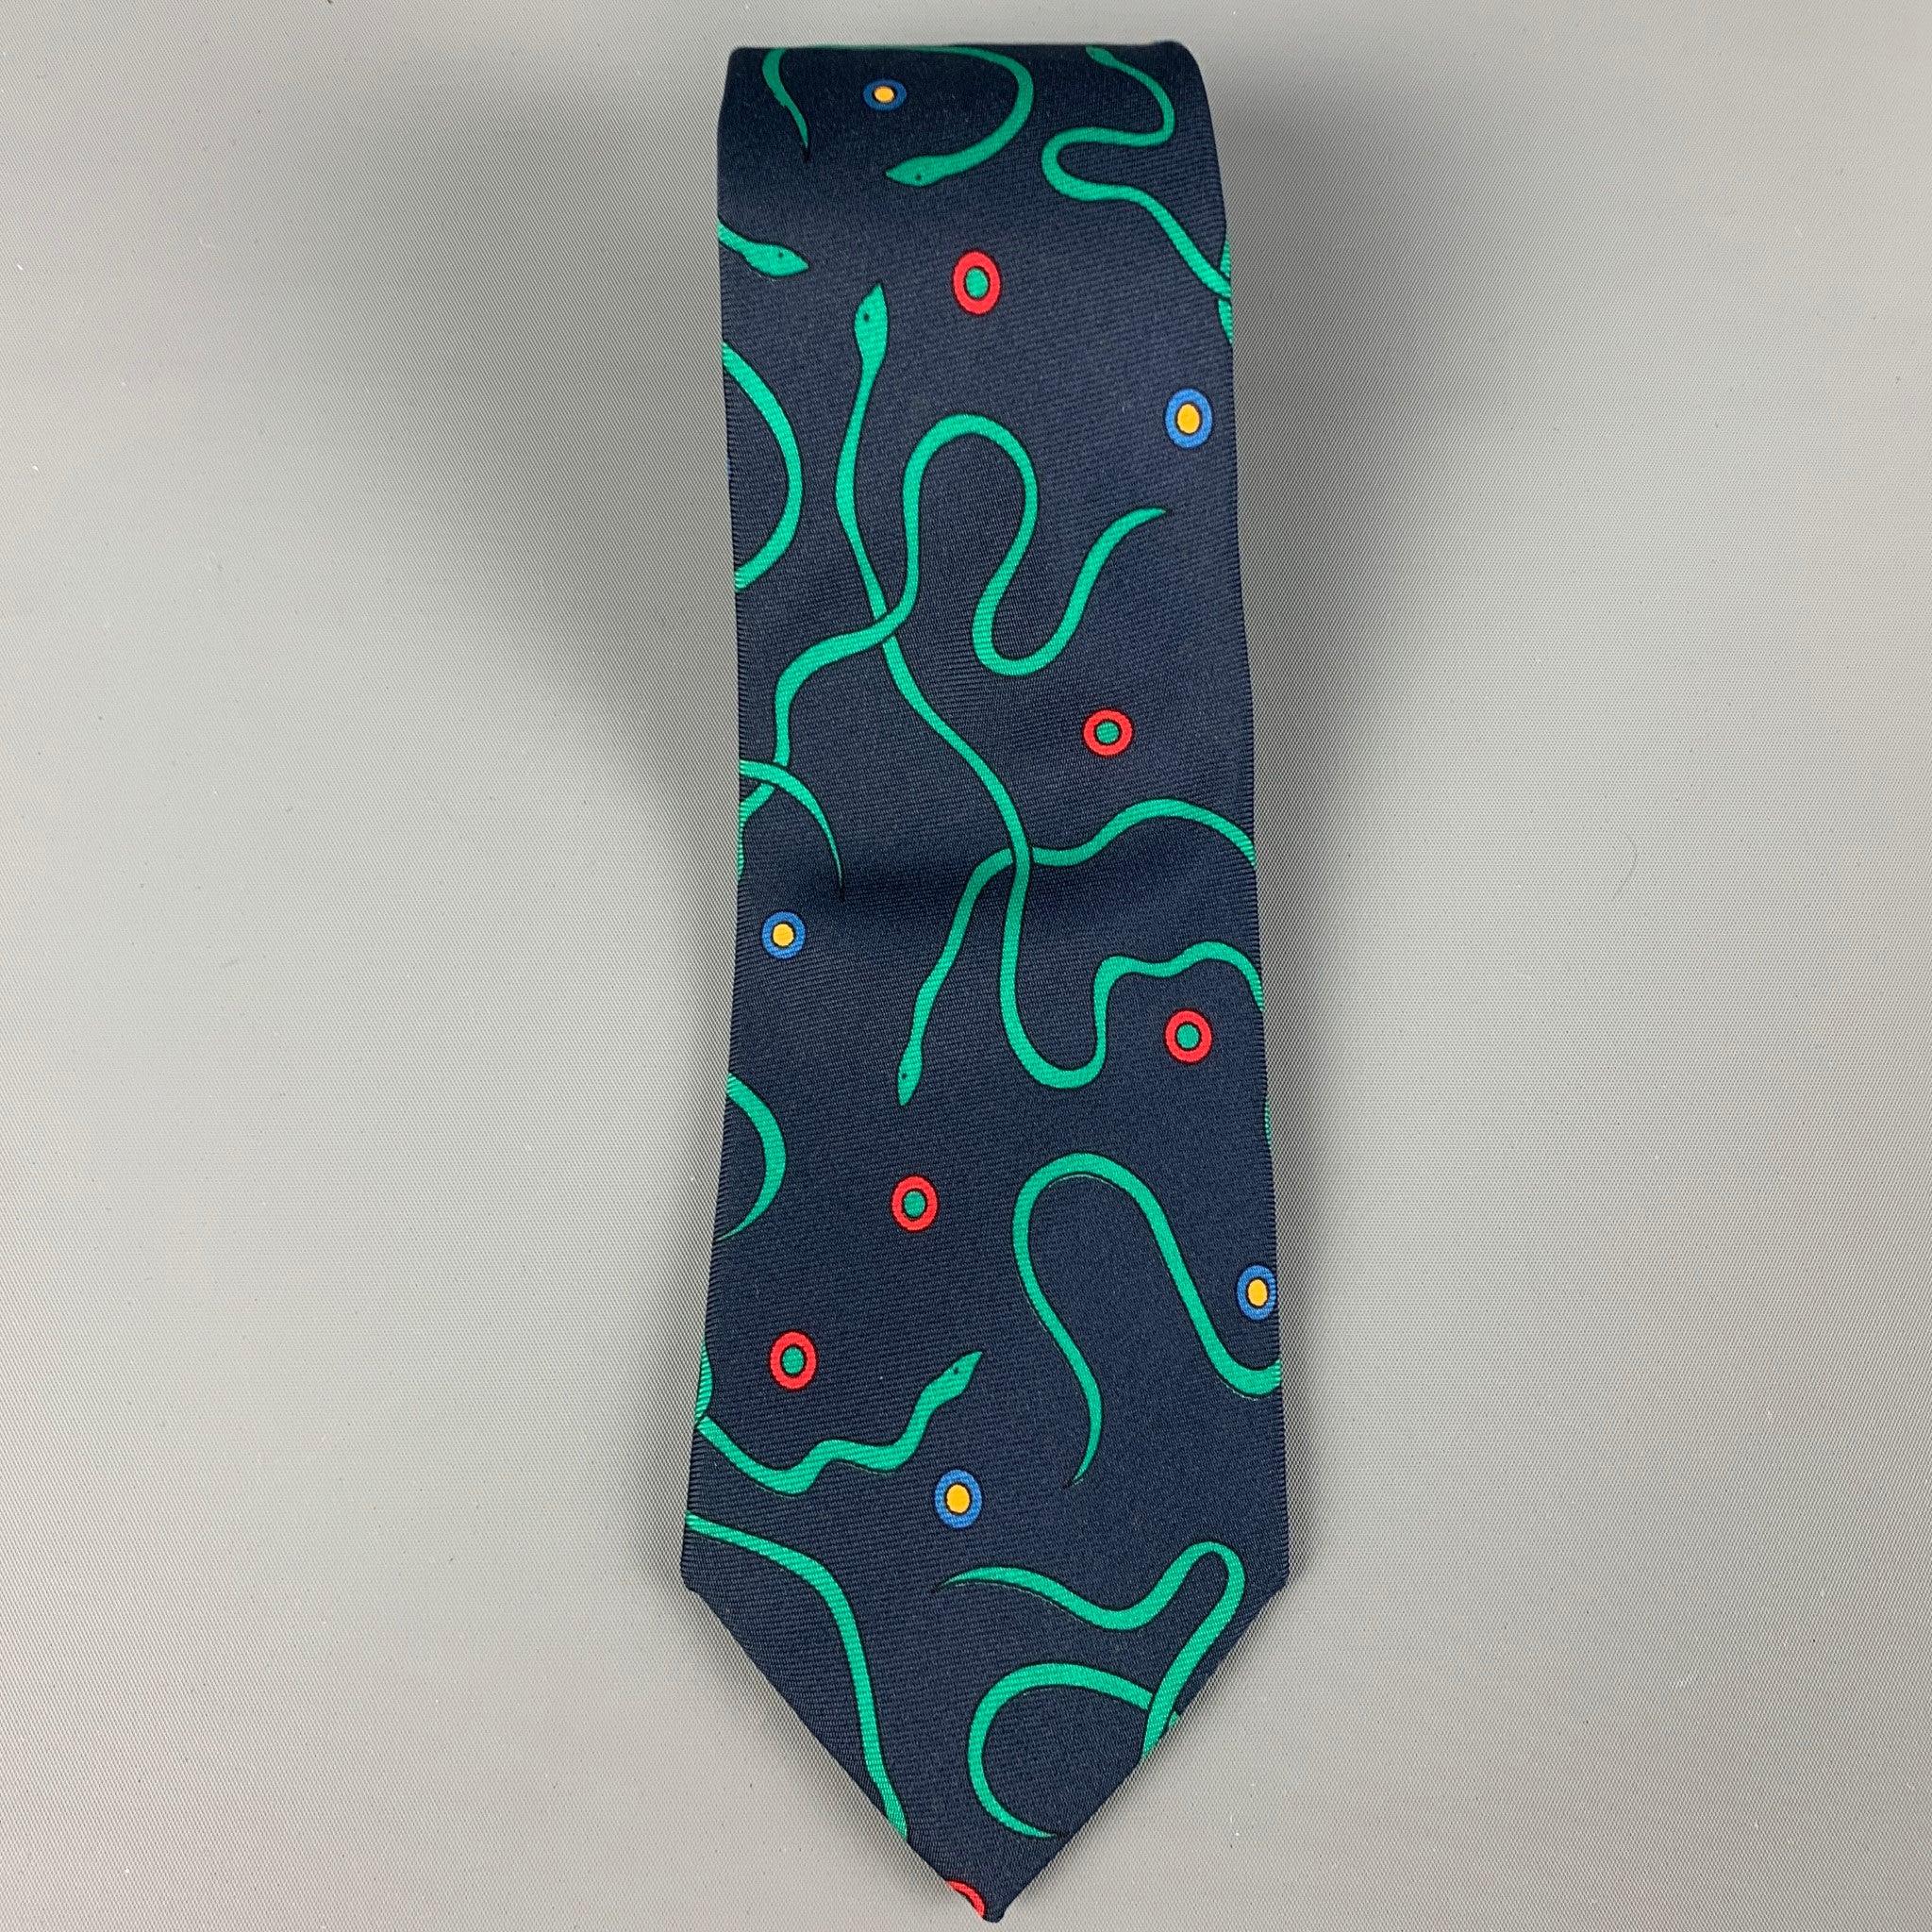 TURNBULL & ASSER necktie comes in a navy & green silk with a all over snake print. Made in England . Very Good Pre-Owned Condition.
Light wear. As-is.  

Measurements: 
  Width: 3.2 inches  / 8 cm. Length: 58.5 inches  / 148.5 cm.
  
  
 
Reference: